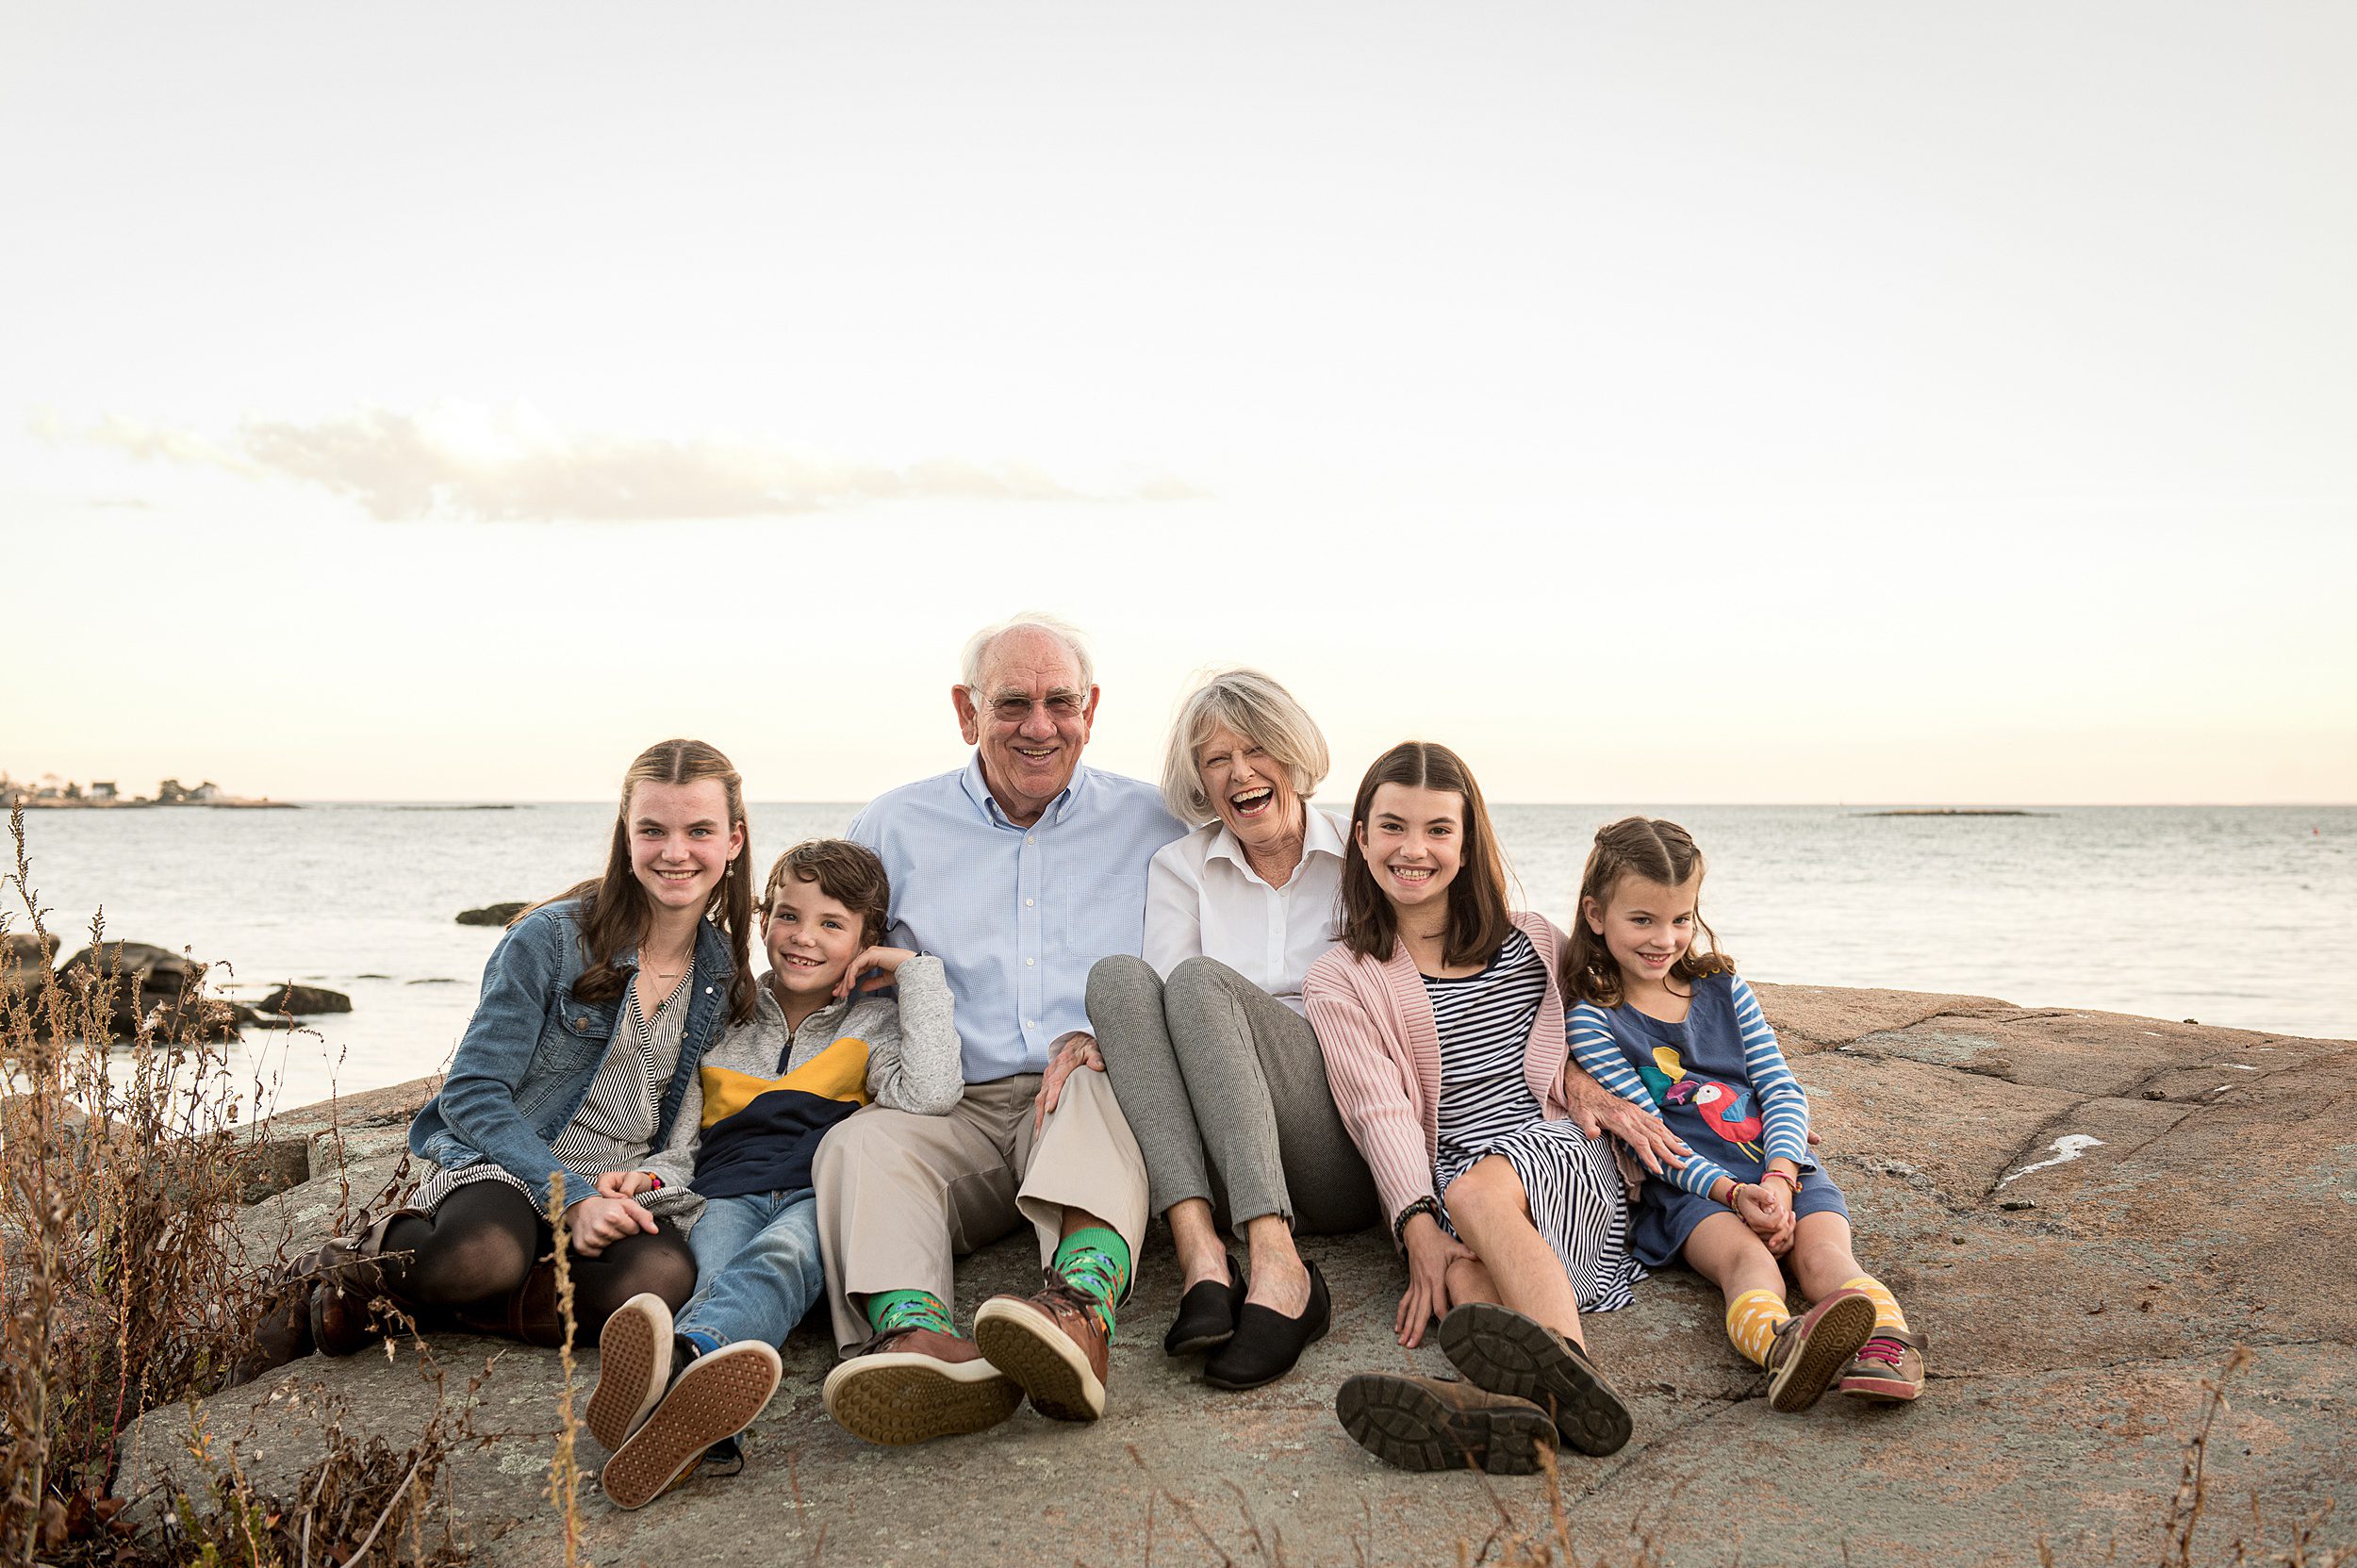 Grandma and grandpa sit on a large rock with their four grand children sitting and cuddling around them on the beach